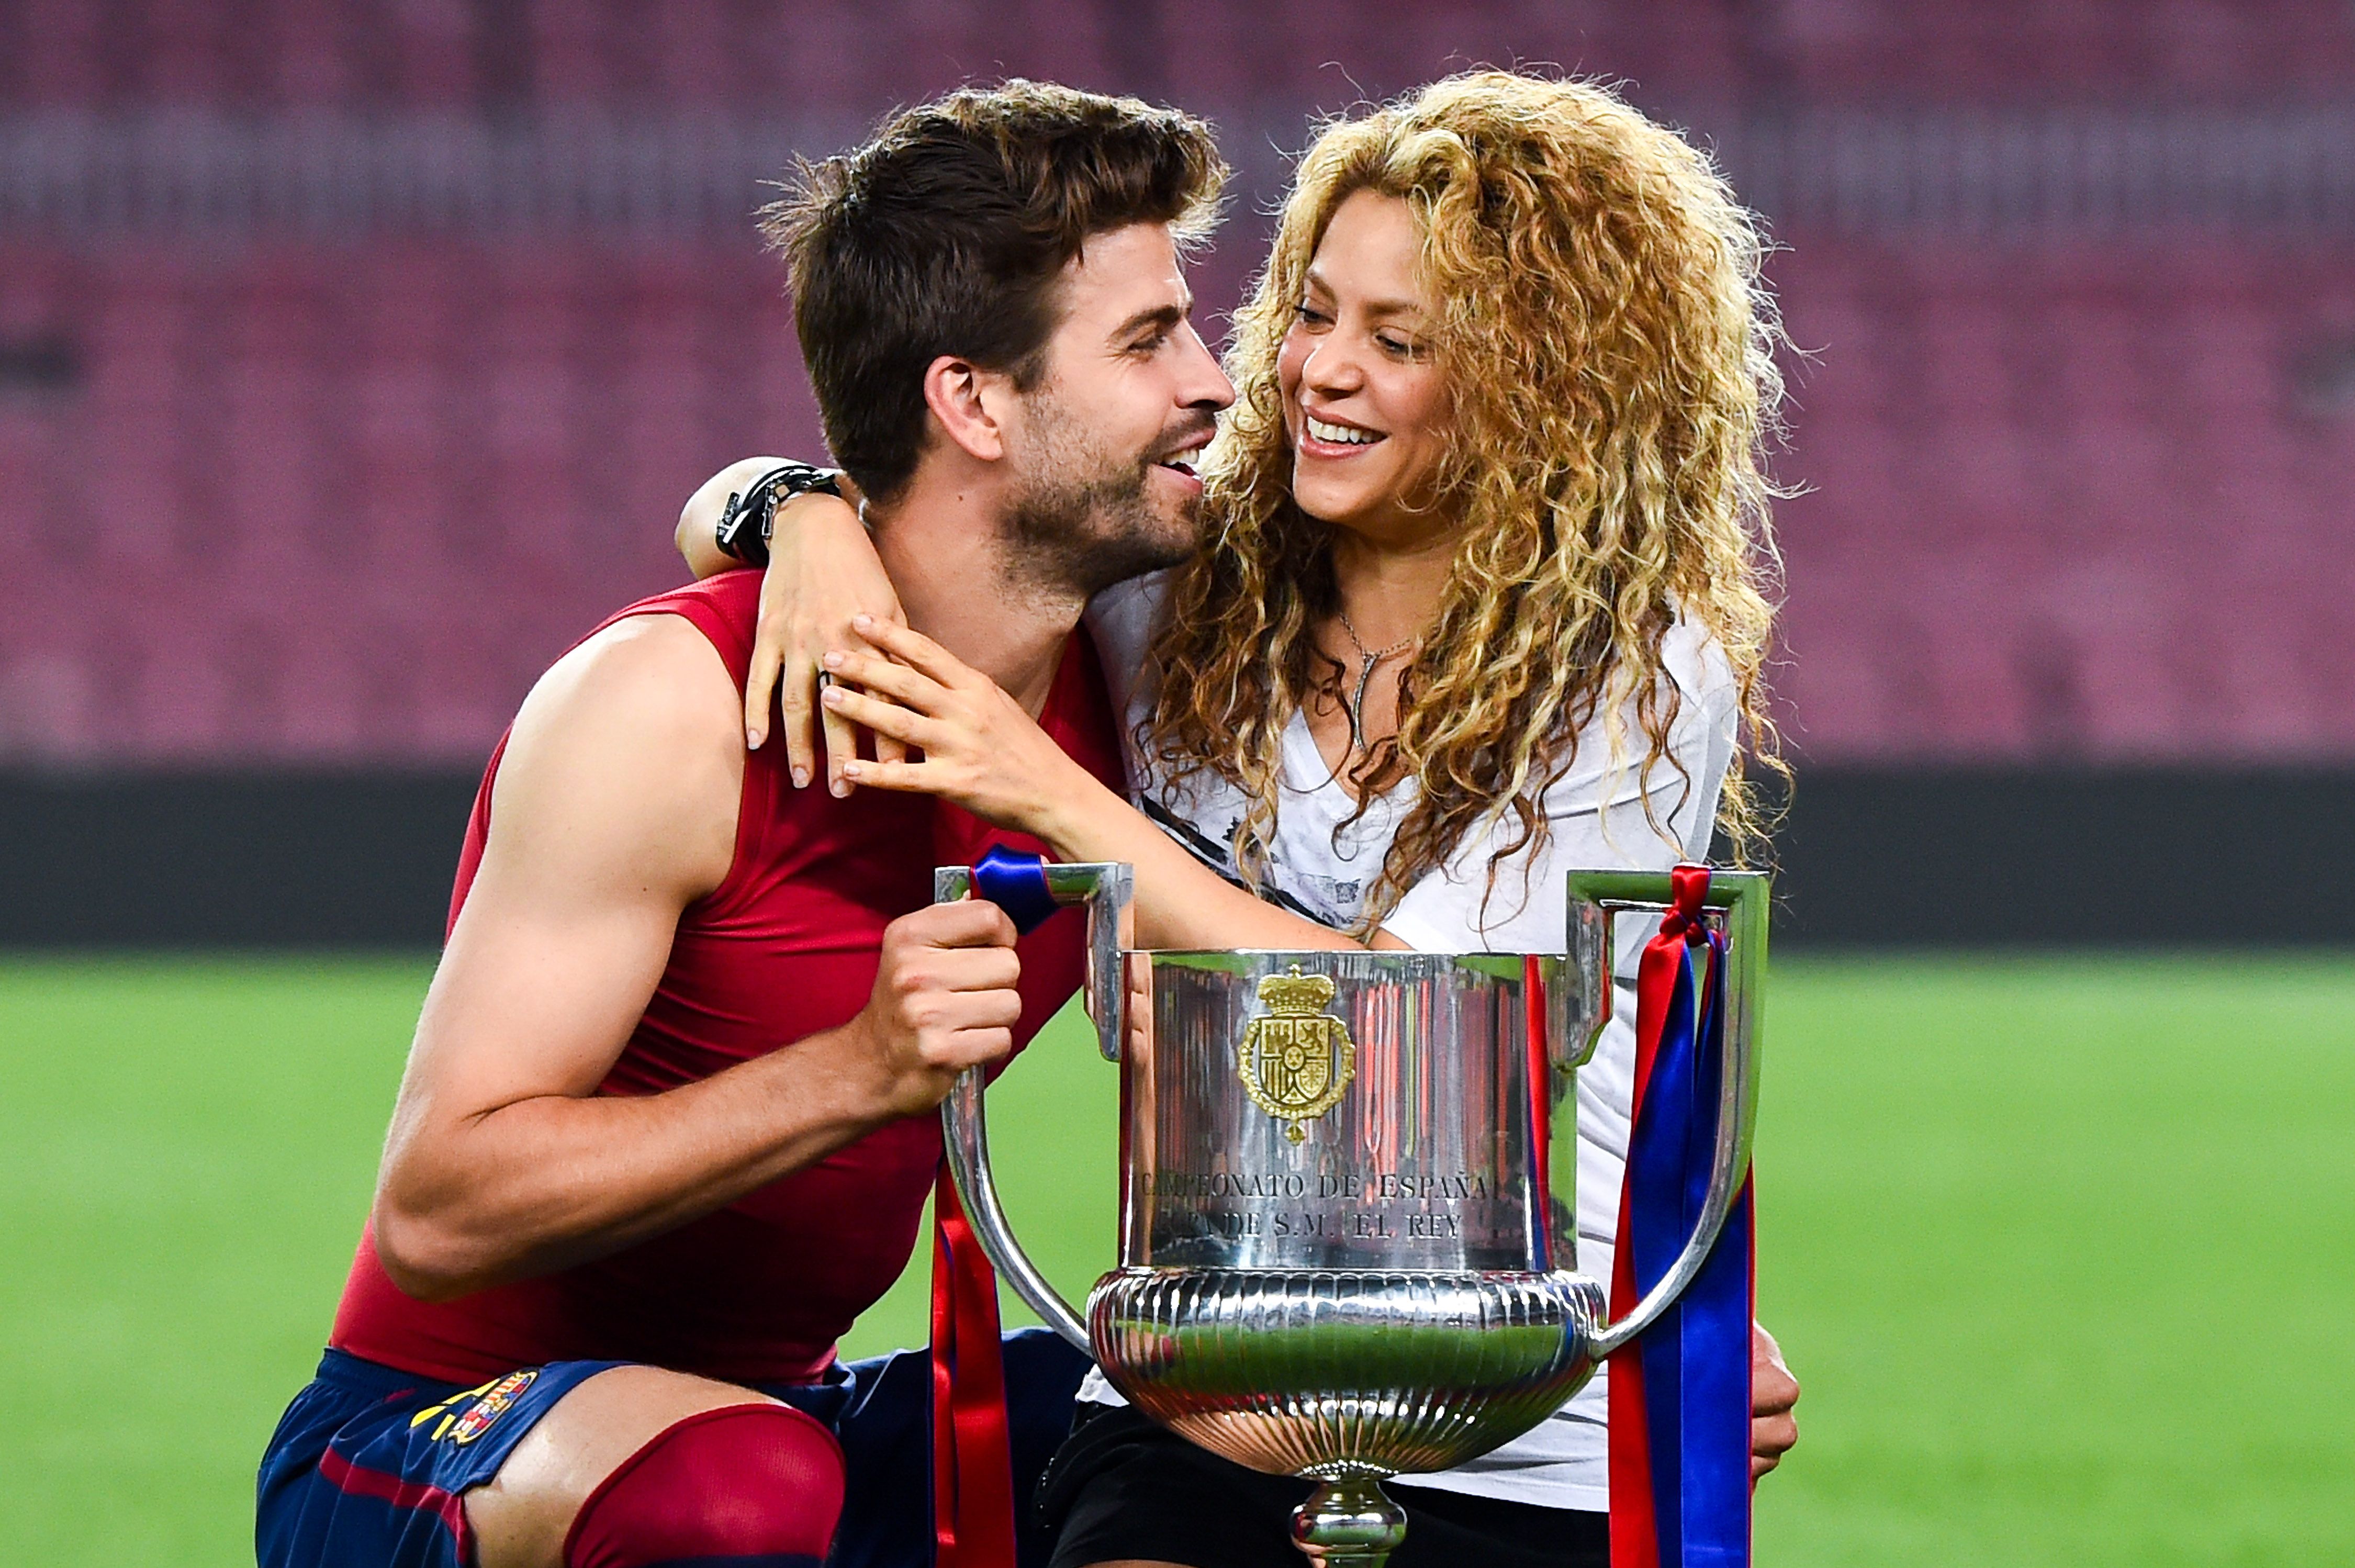 Gerard Pique and Shakira pose with a trophy at Camp Nou on May 30, 2015 in Barcelona, Spain. | Source: Getty Images